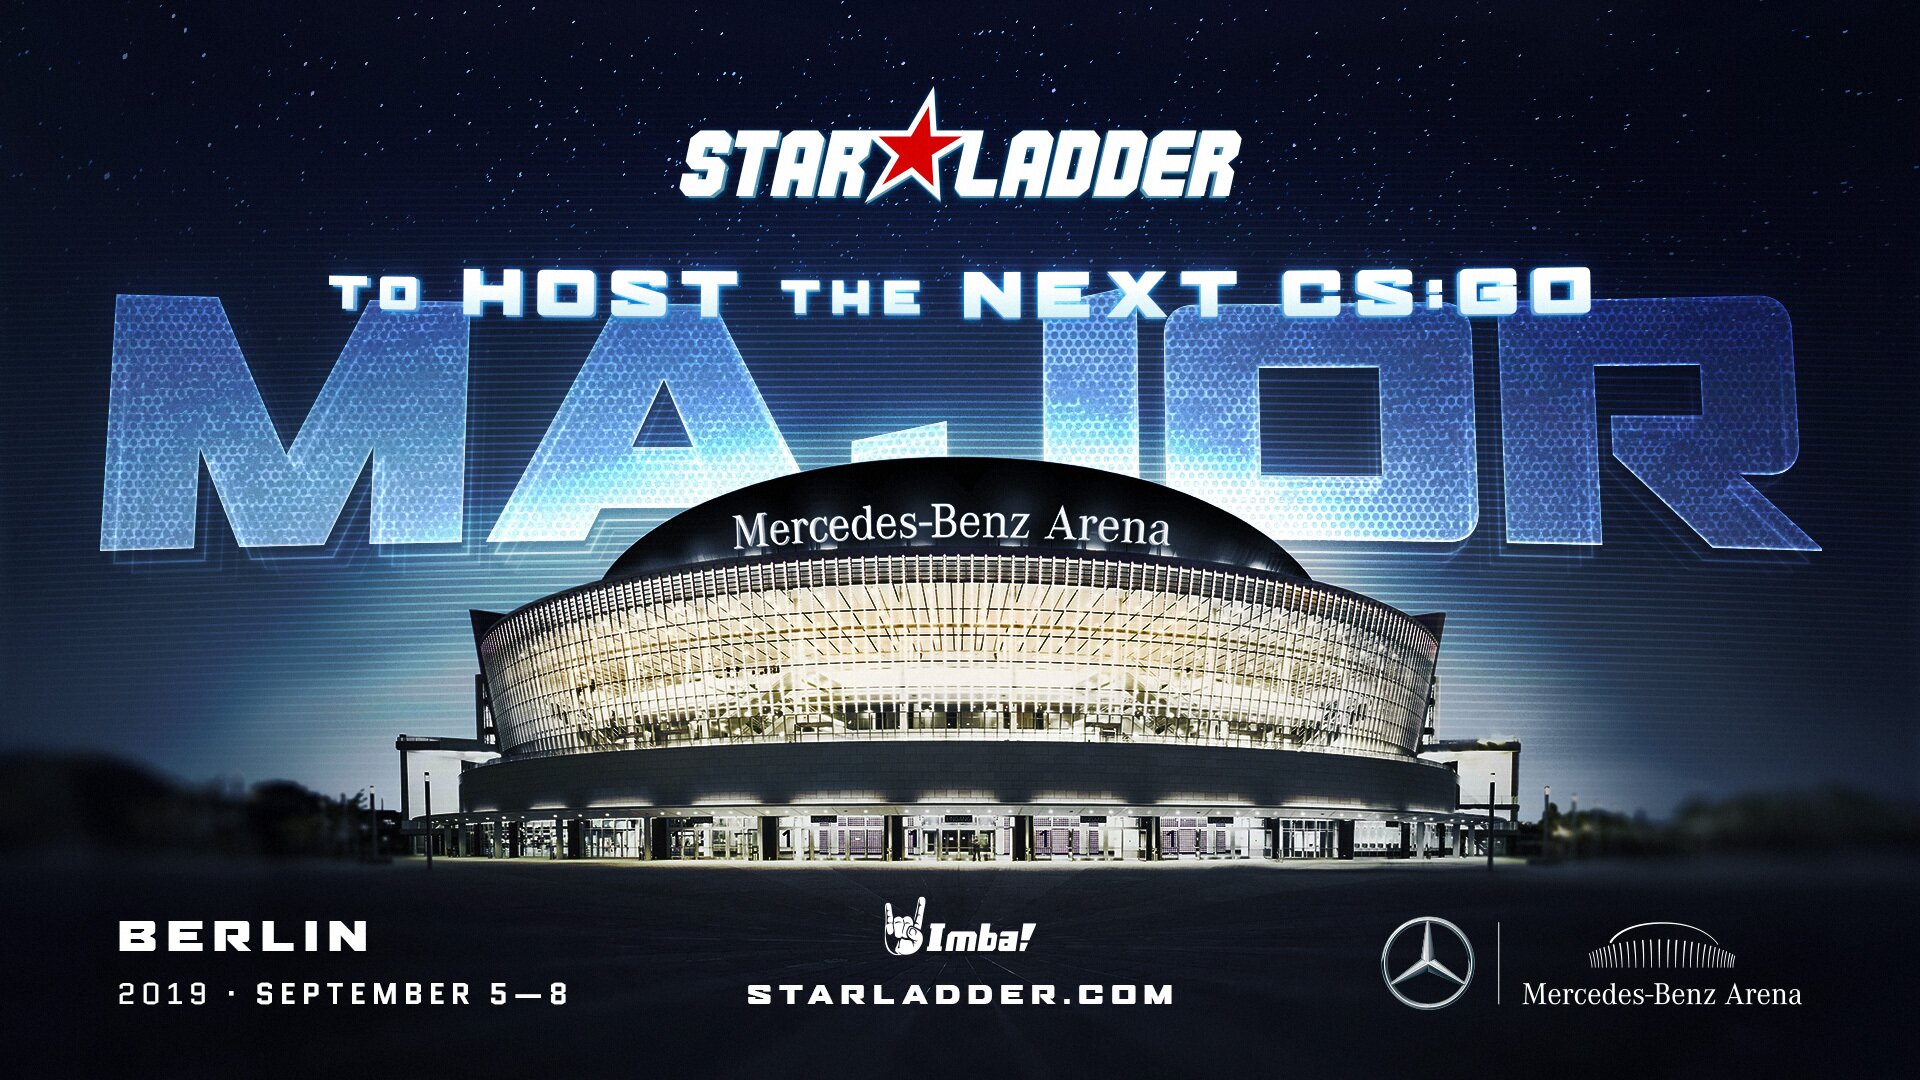 StarLadder Berlin will see twenty-four teams compete for $1,000,000.